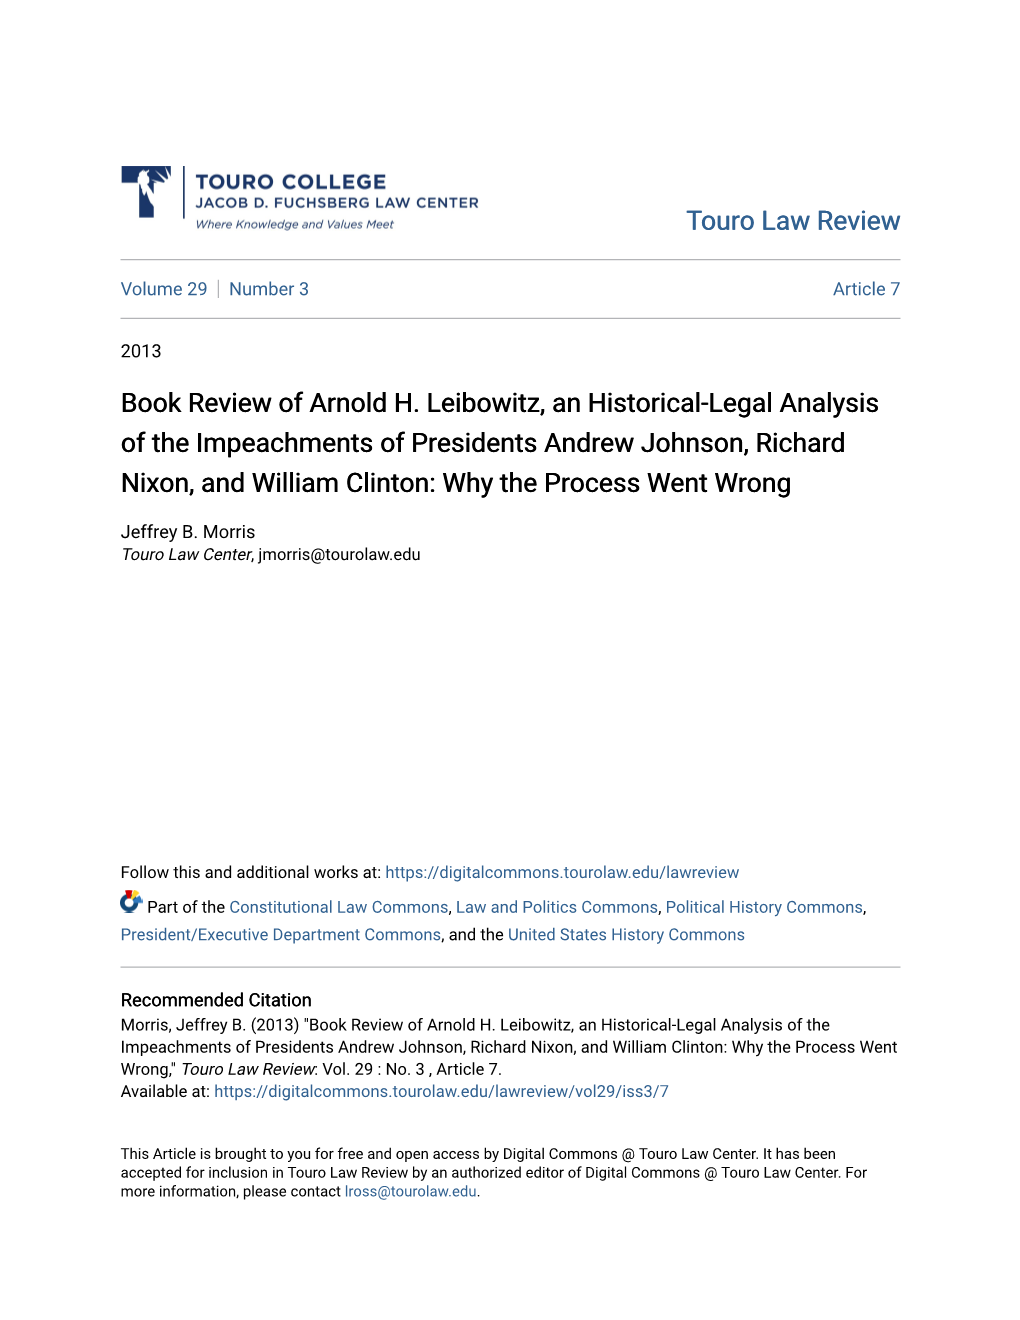 Book Review of Arnold H. Leibowitz, an Historical-Legal Analysis of the Impeachments of Presidents Andrew Johnson, Richard Nixon